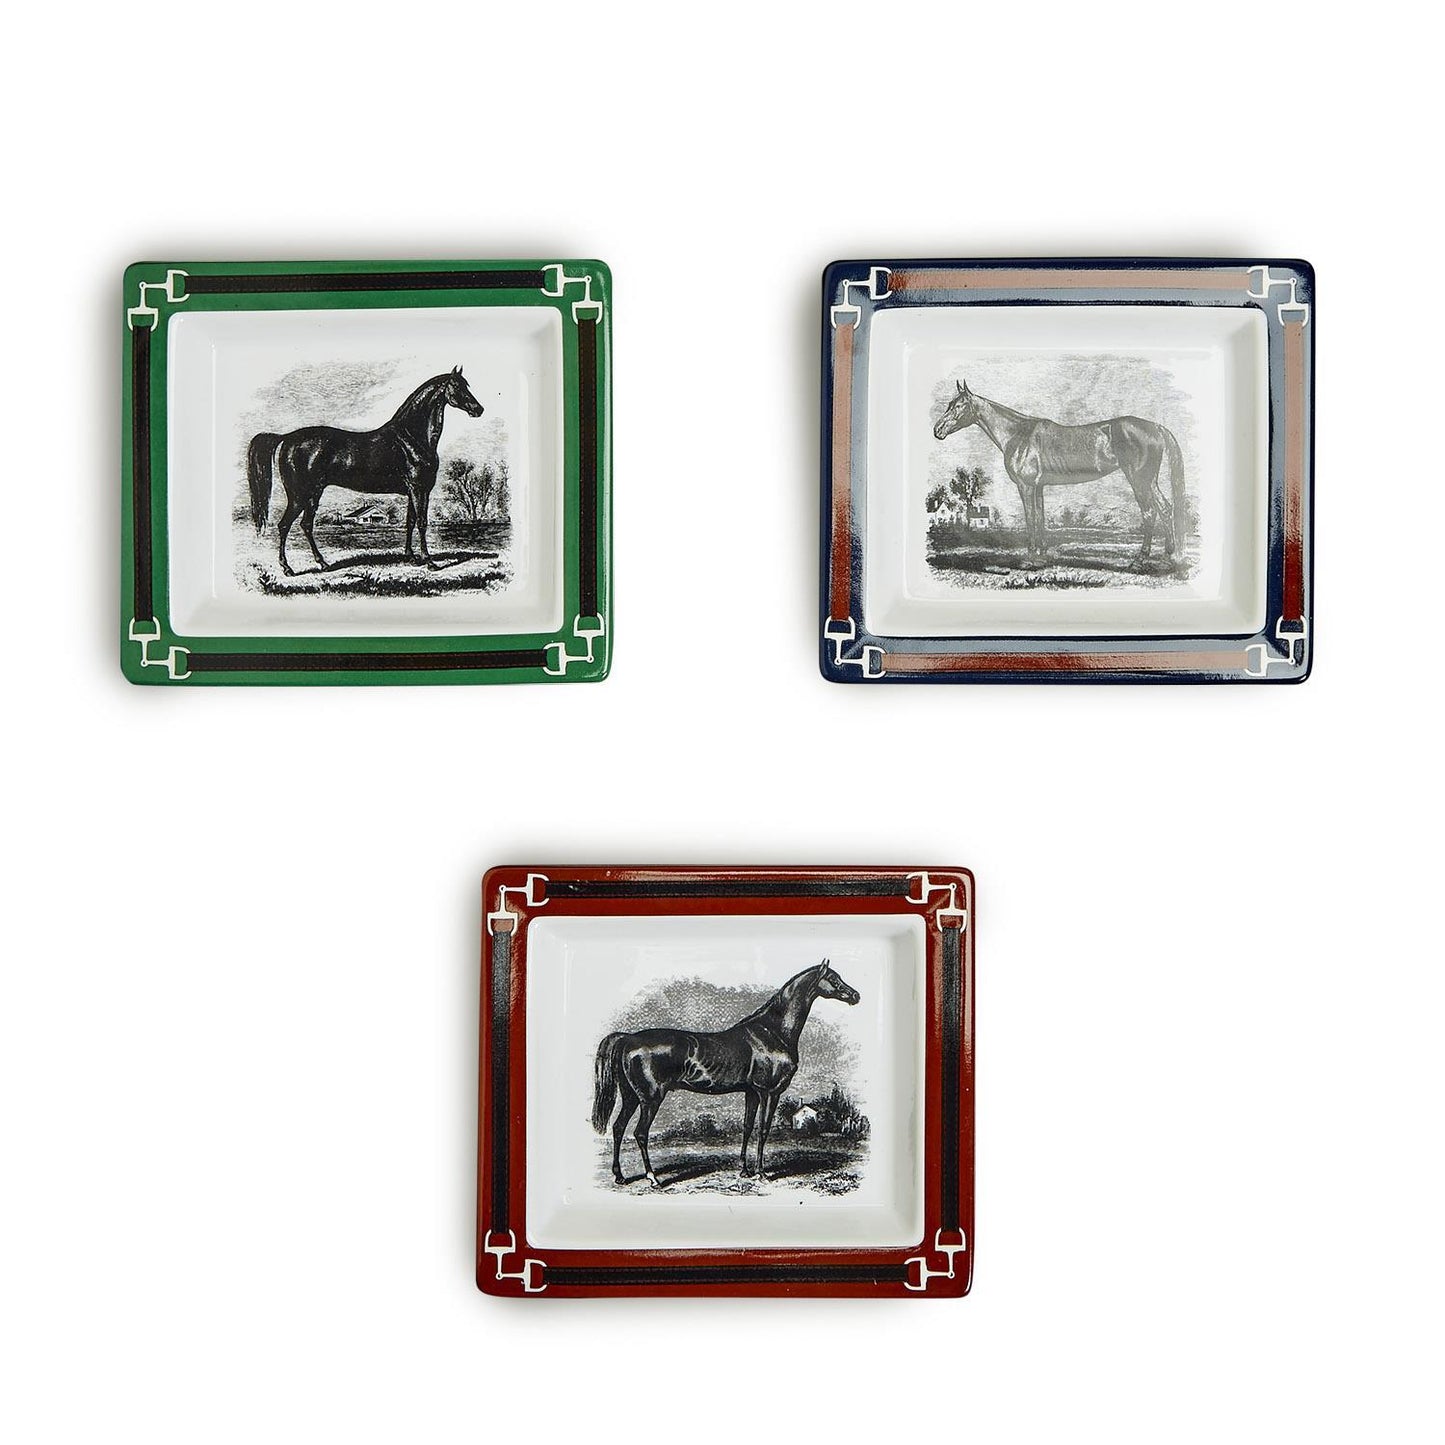 Two's Company Equus Decorative Desk Trays In Gift Box Asst 3 Designs / Colors